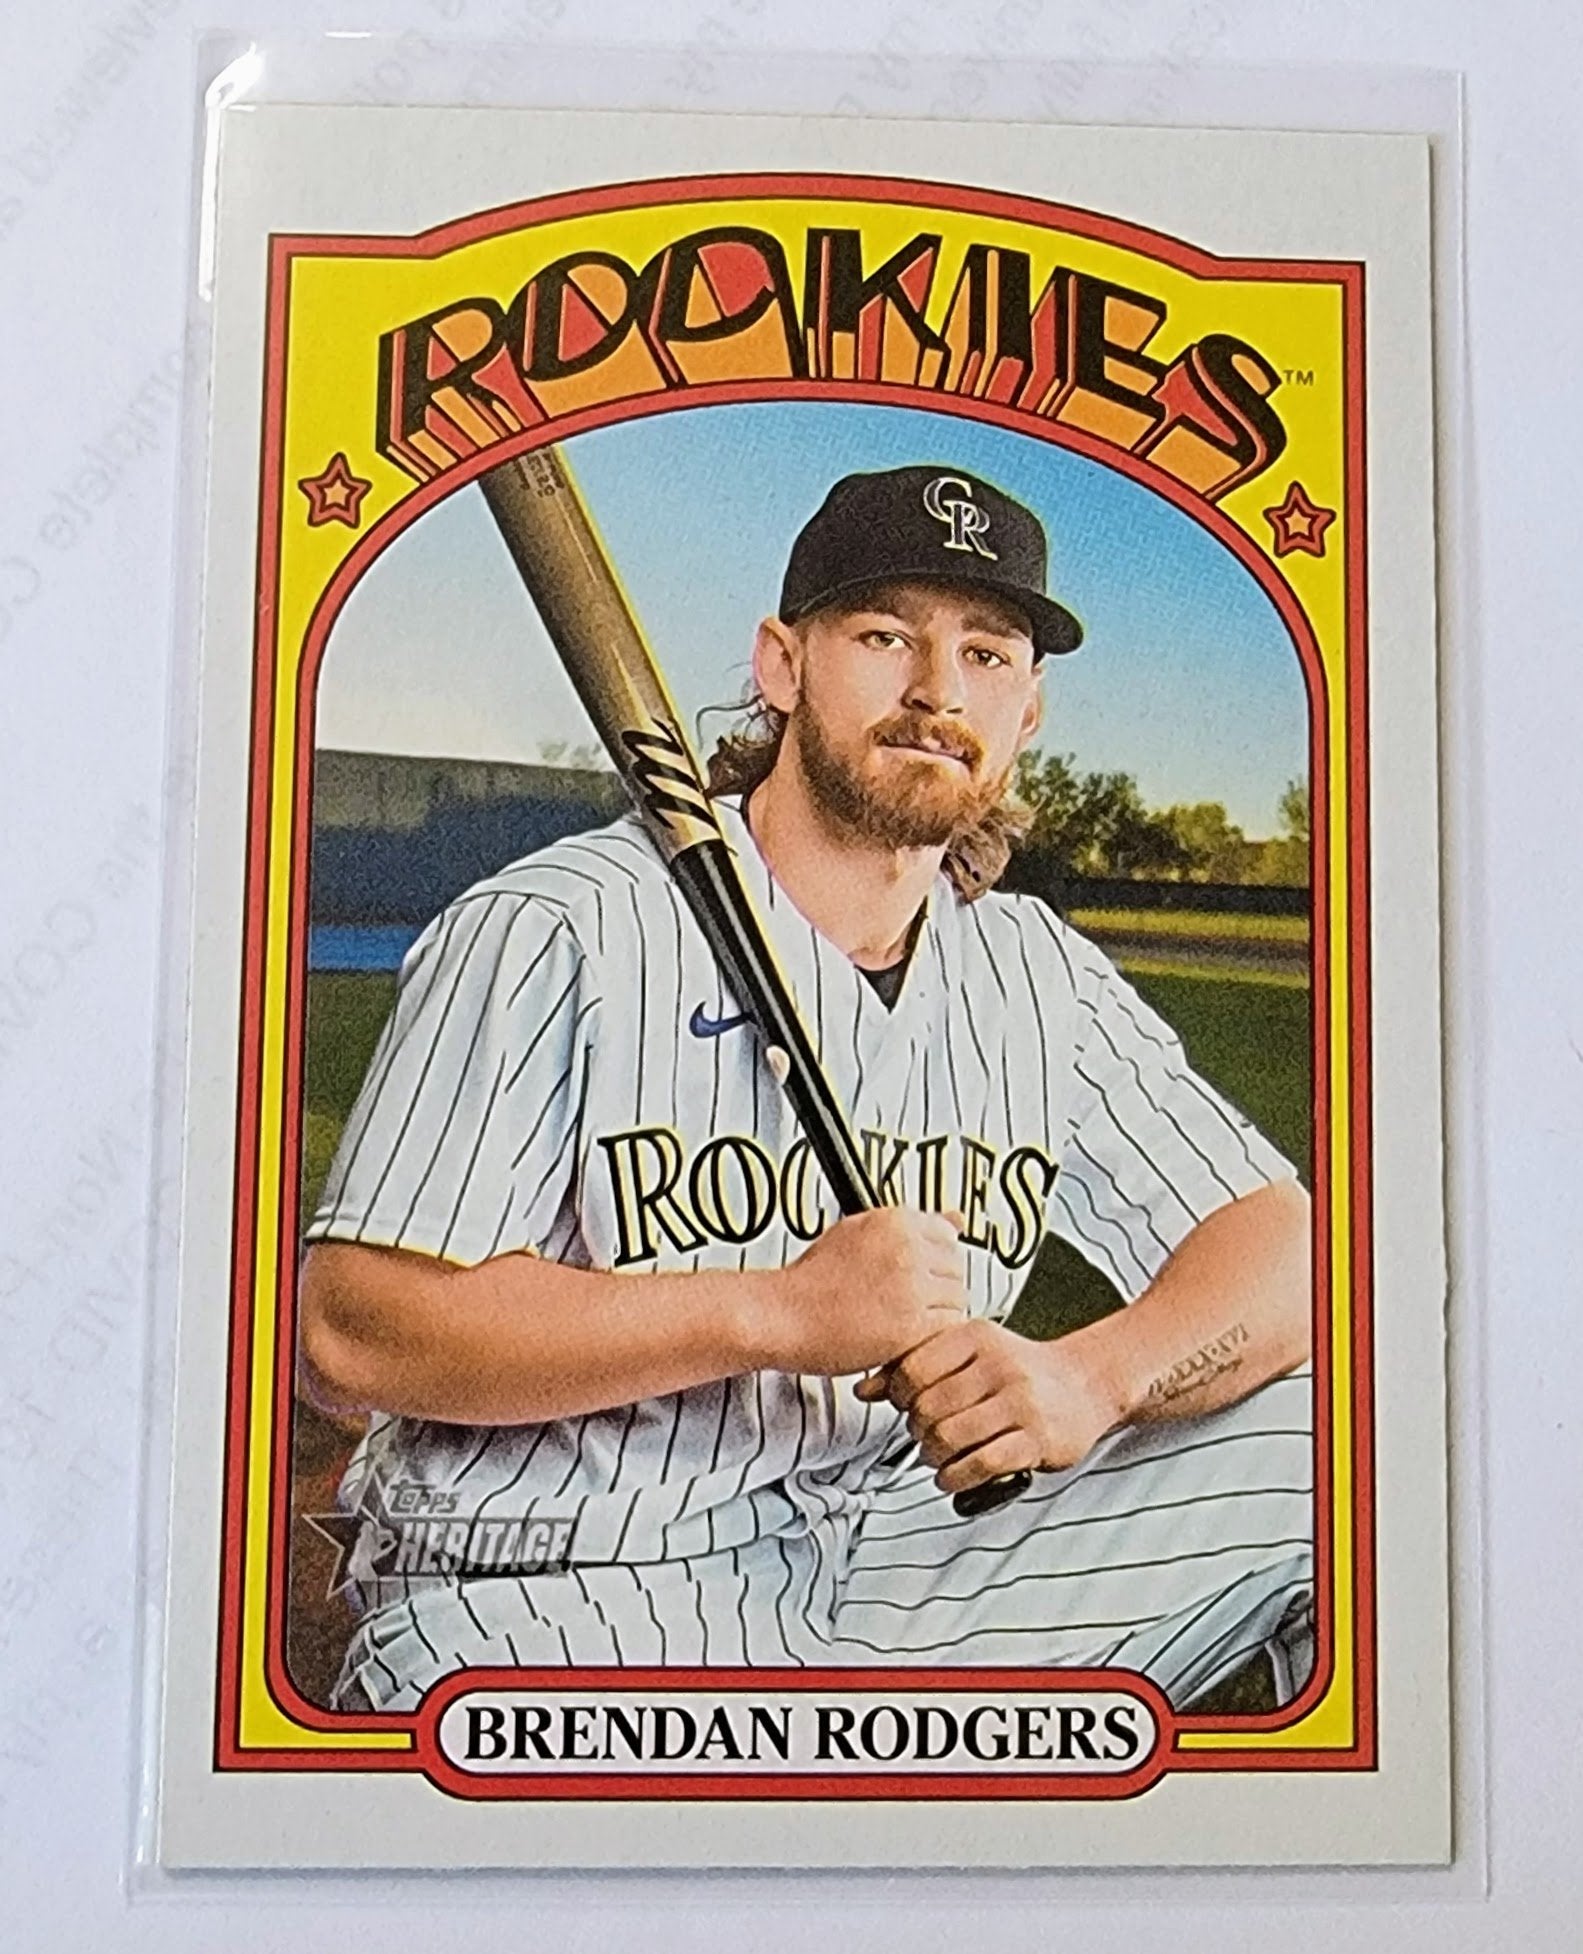 2021 Topps Heritage Brendan Rogers Baseball Trading Card MCSC1 simple Xclusive Collectibles   